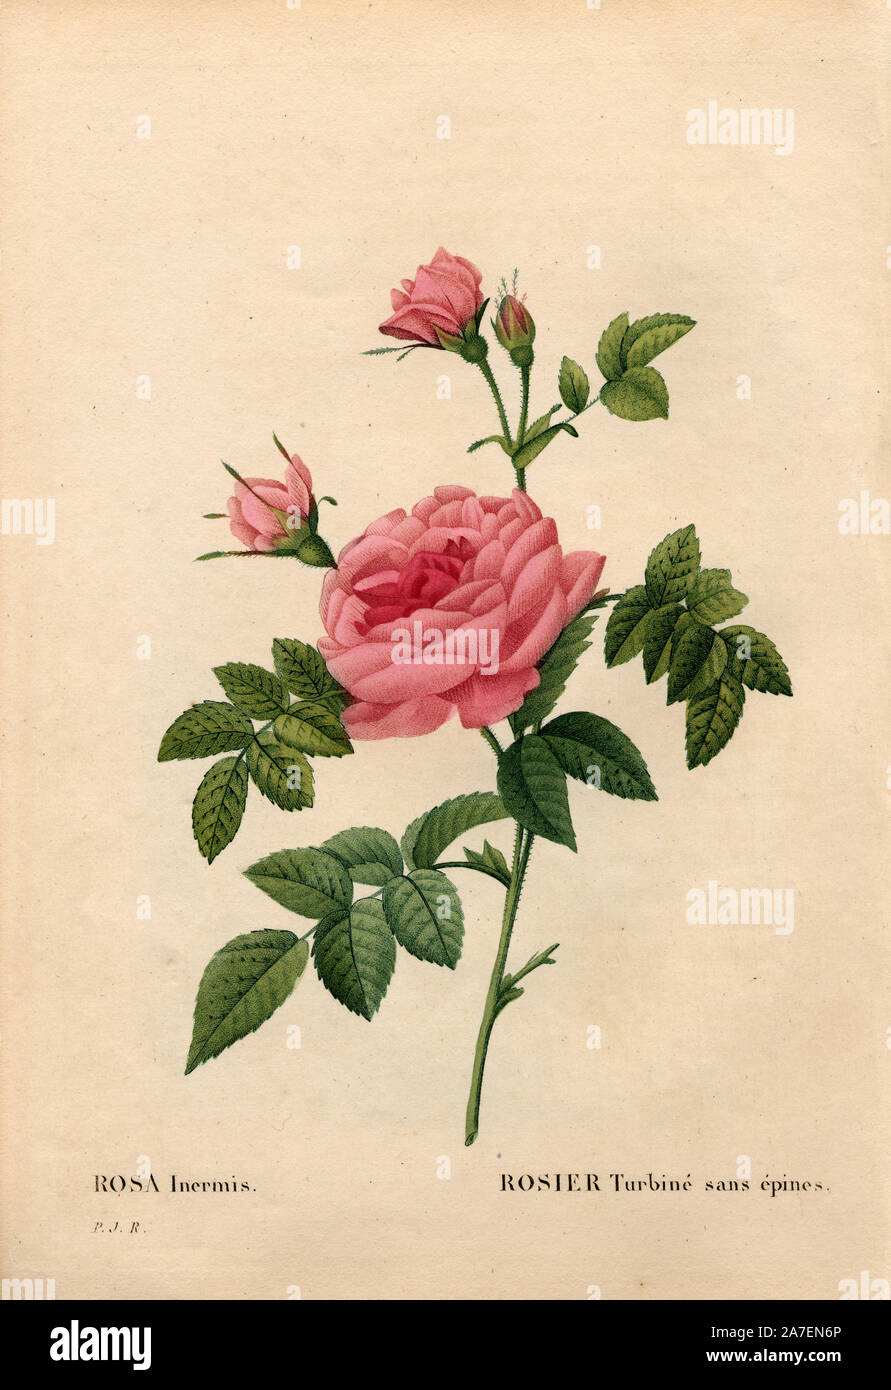 Rose without a thorn, Rosa francofurtana variety, Rosier turbiné sans épines. Handcoloured stipple copperplate engraving from Pierre Joseph Redoute's 'Les Roses,' Paris, 1828. Redoute was botanical artist to Marie Antoinette and Empress Josephine. He painted over 170 watercolours of roses from the gardens of Malmaison. Stock Photo